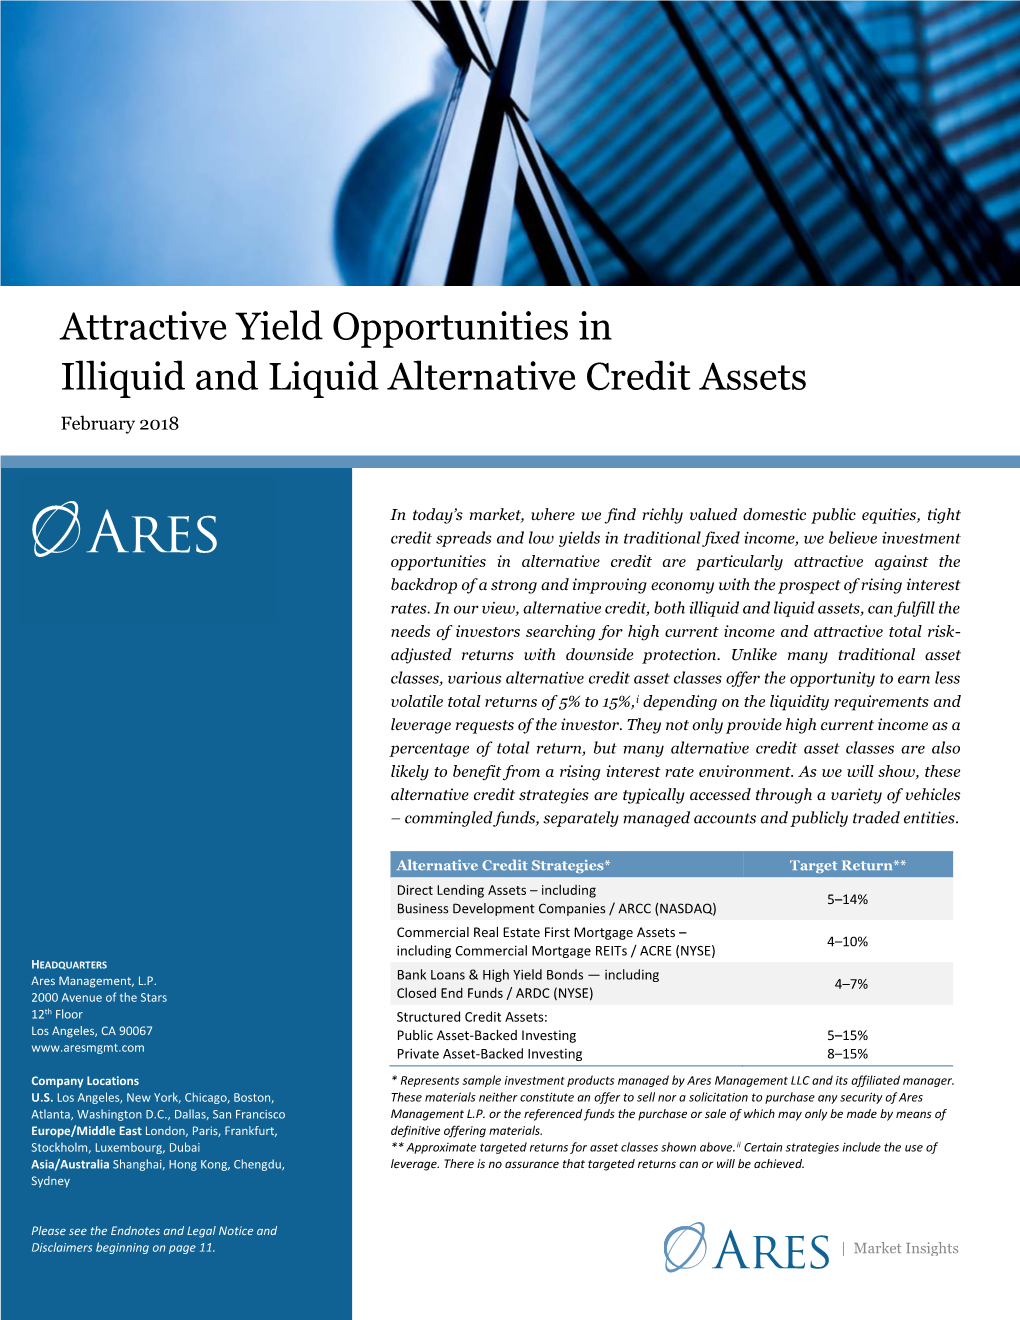 Attractive Yield Opportunities in Illiquid and Liquid Alternative Credit Assets February 2018